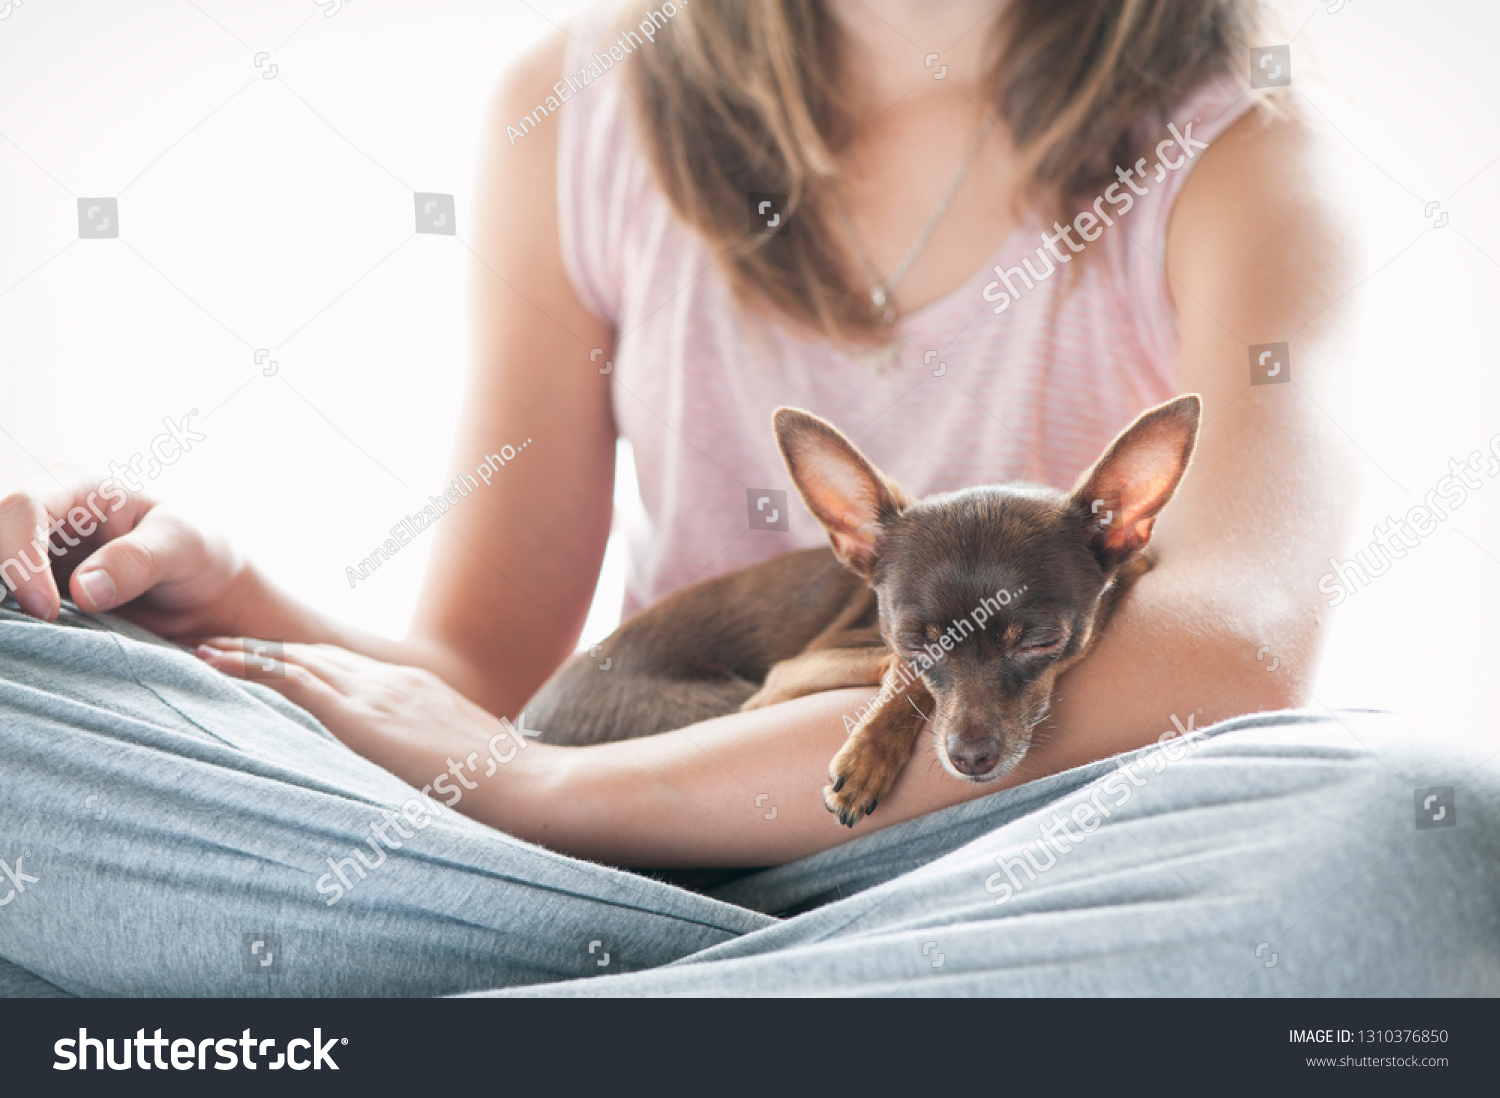 Friendship, trusting, devotion. Little toy-terrier dog sleeping on young owner's hand. Multicolored vibrant indoors filtered image #1310376850